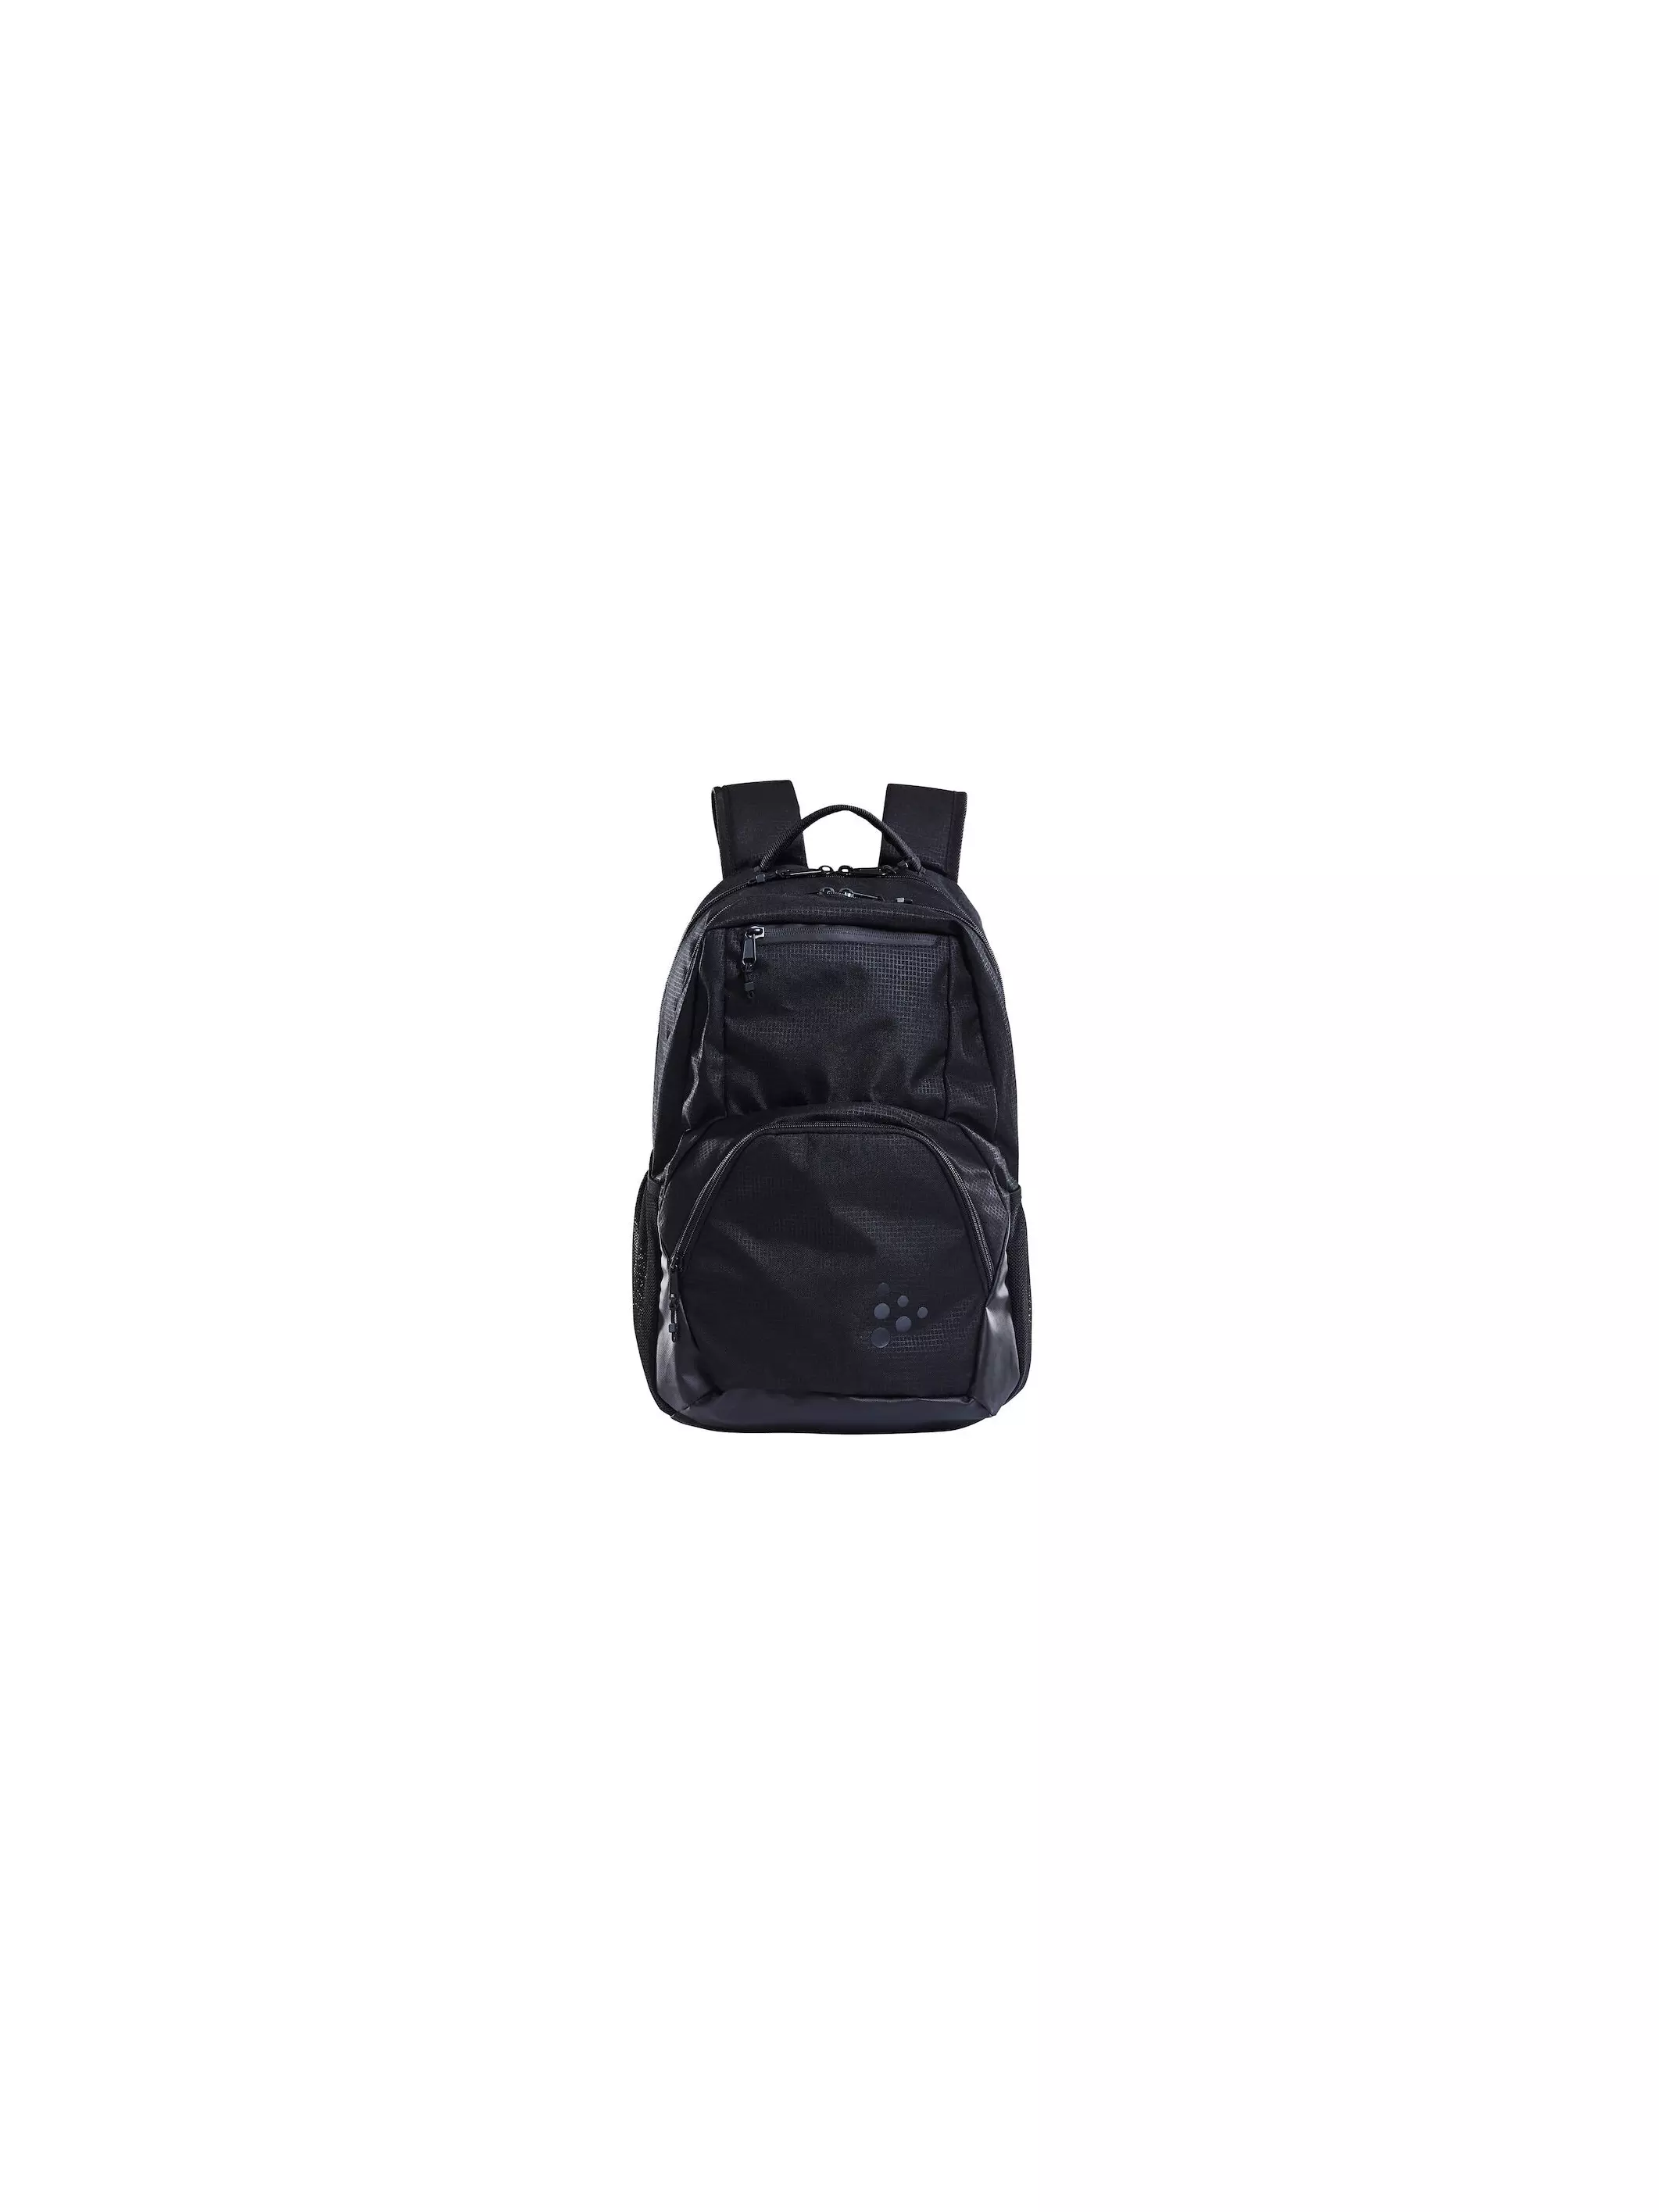 Bagagerie Craft TRANSIT 25L BACKPACK - 1905739